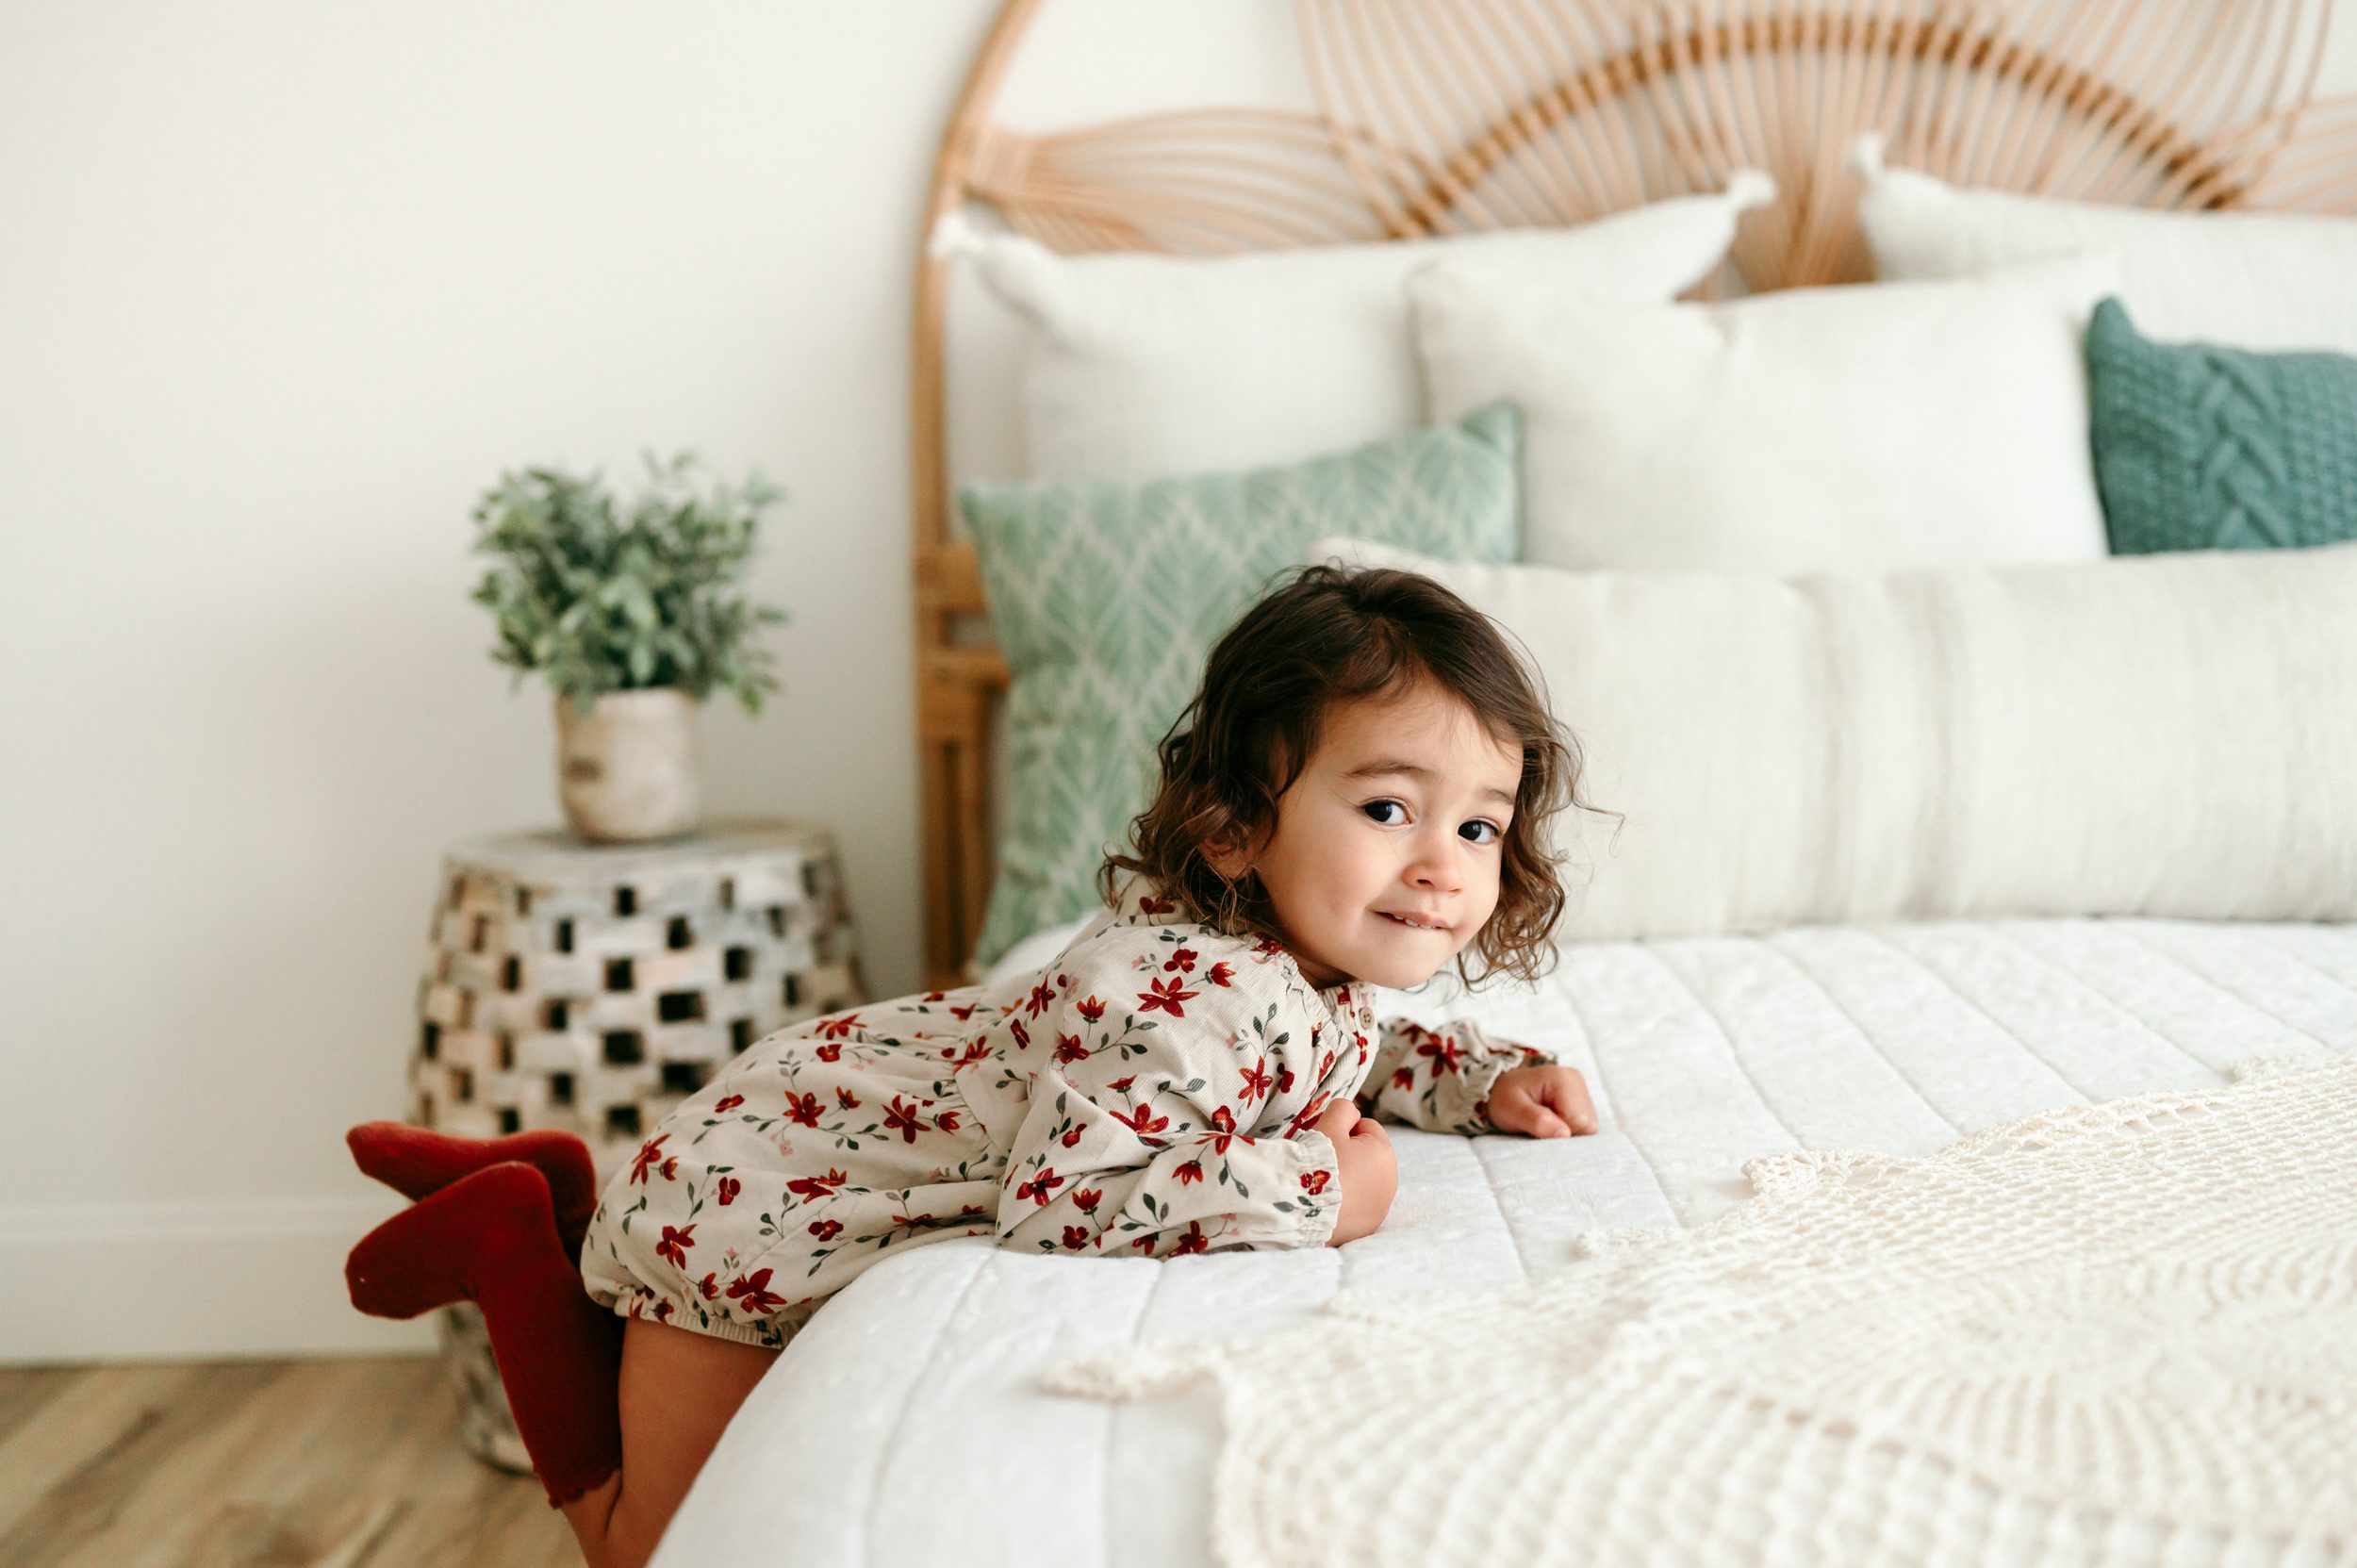 a young girl climbing up onto a bed and lifting her feet in the air as she looks at the camera and bites her lower lip during a toddler milestone photography session